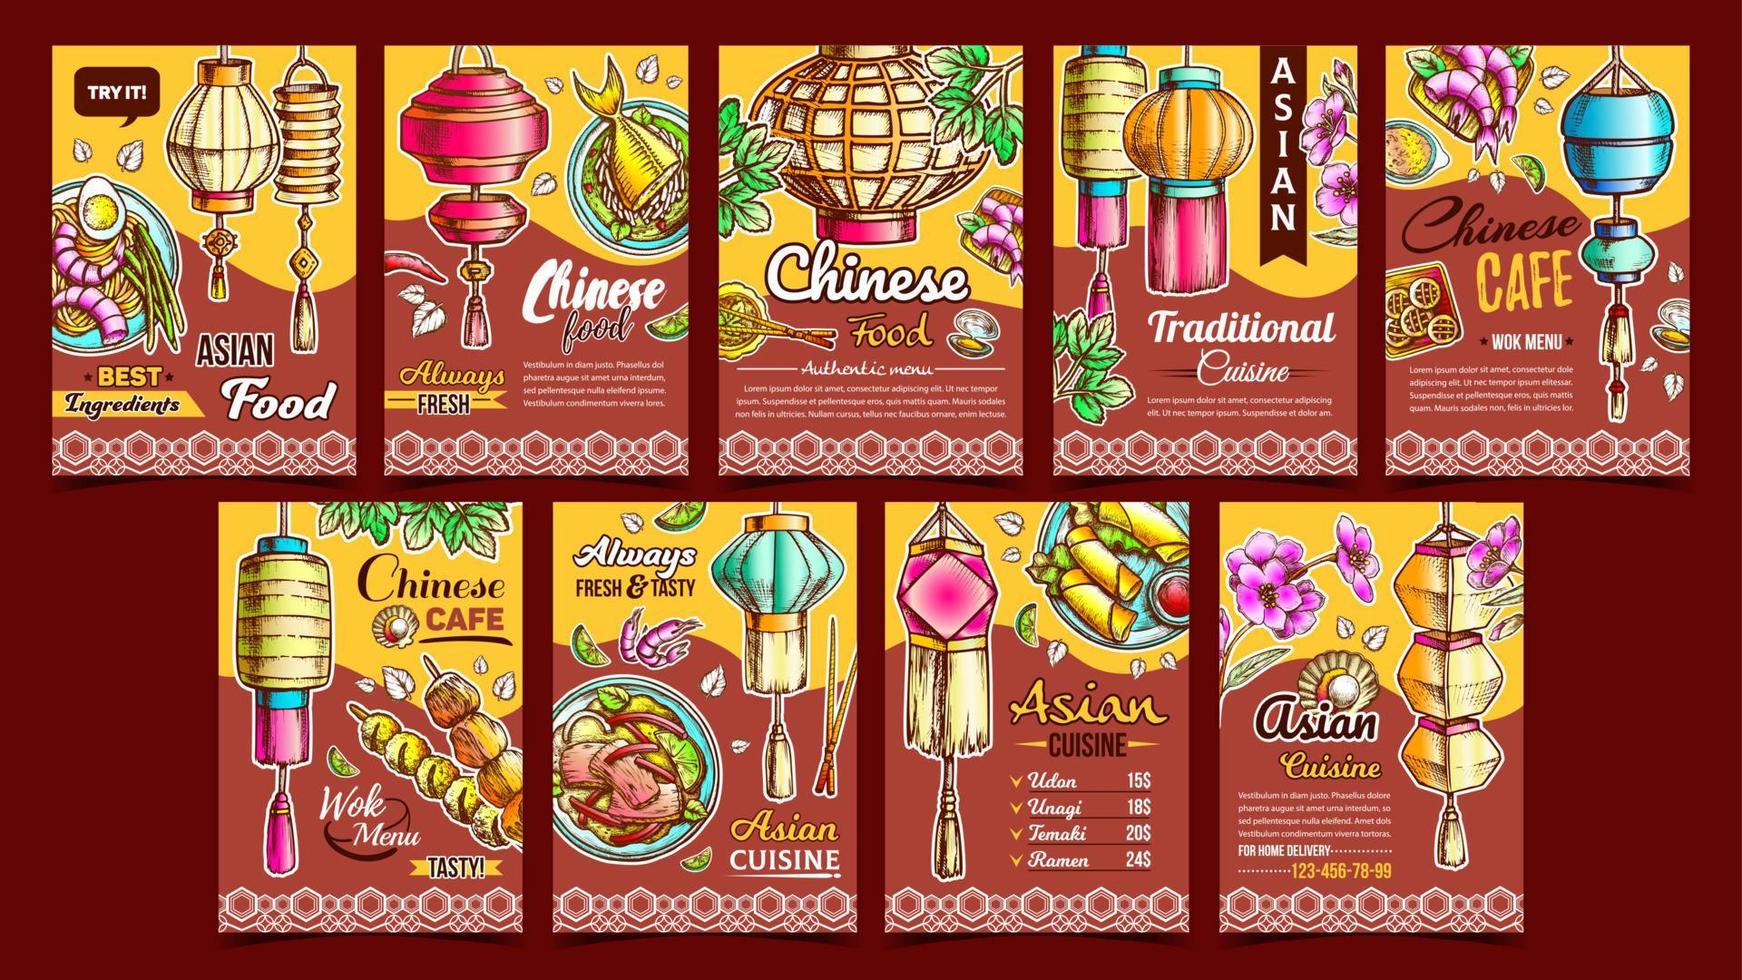 Chinese Food Cafe Advertising Posters Set Vector